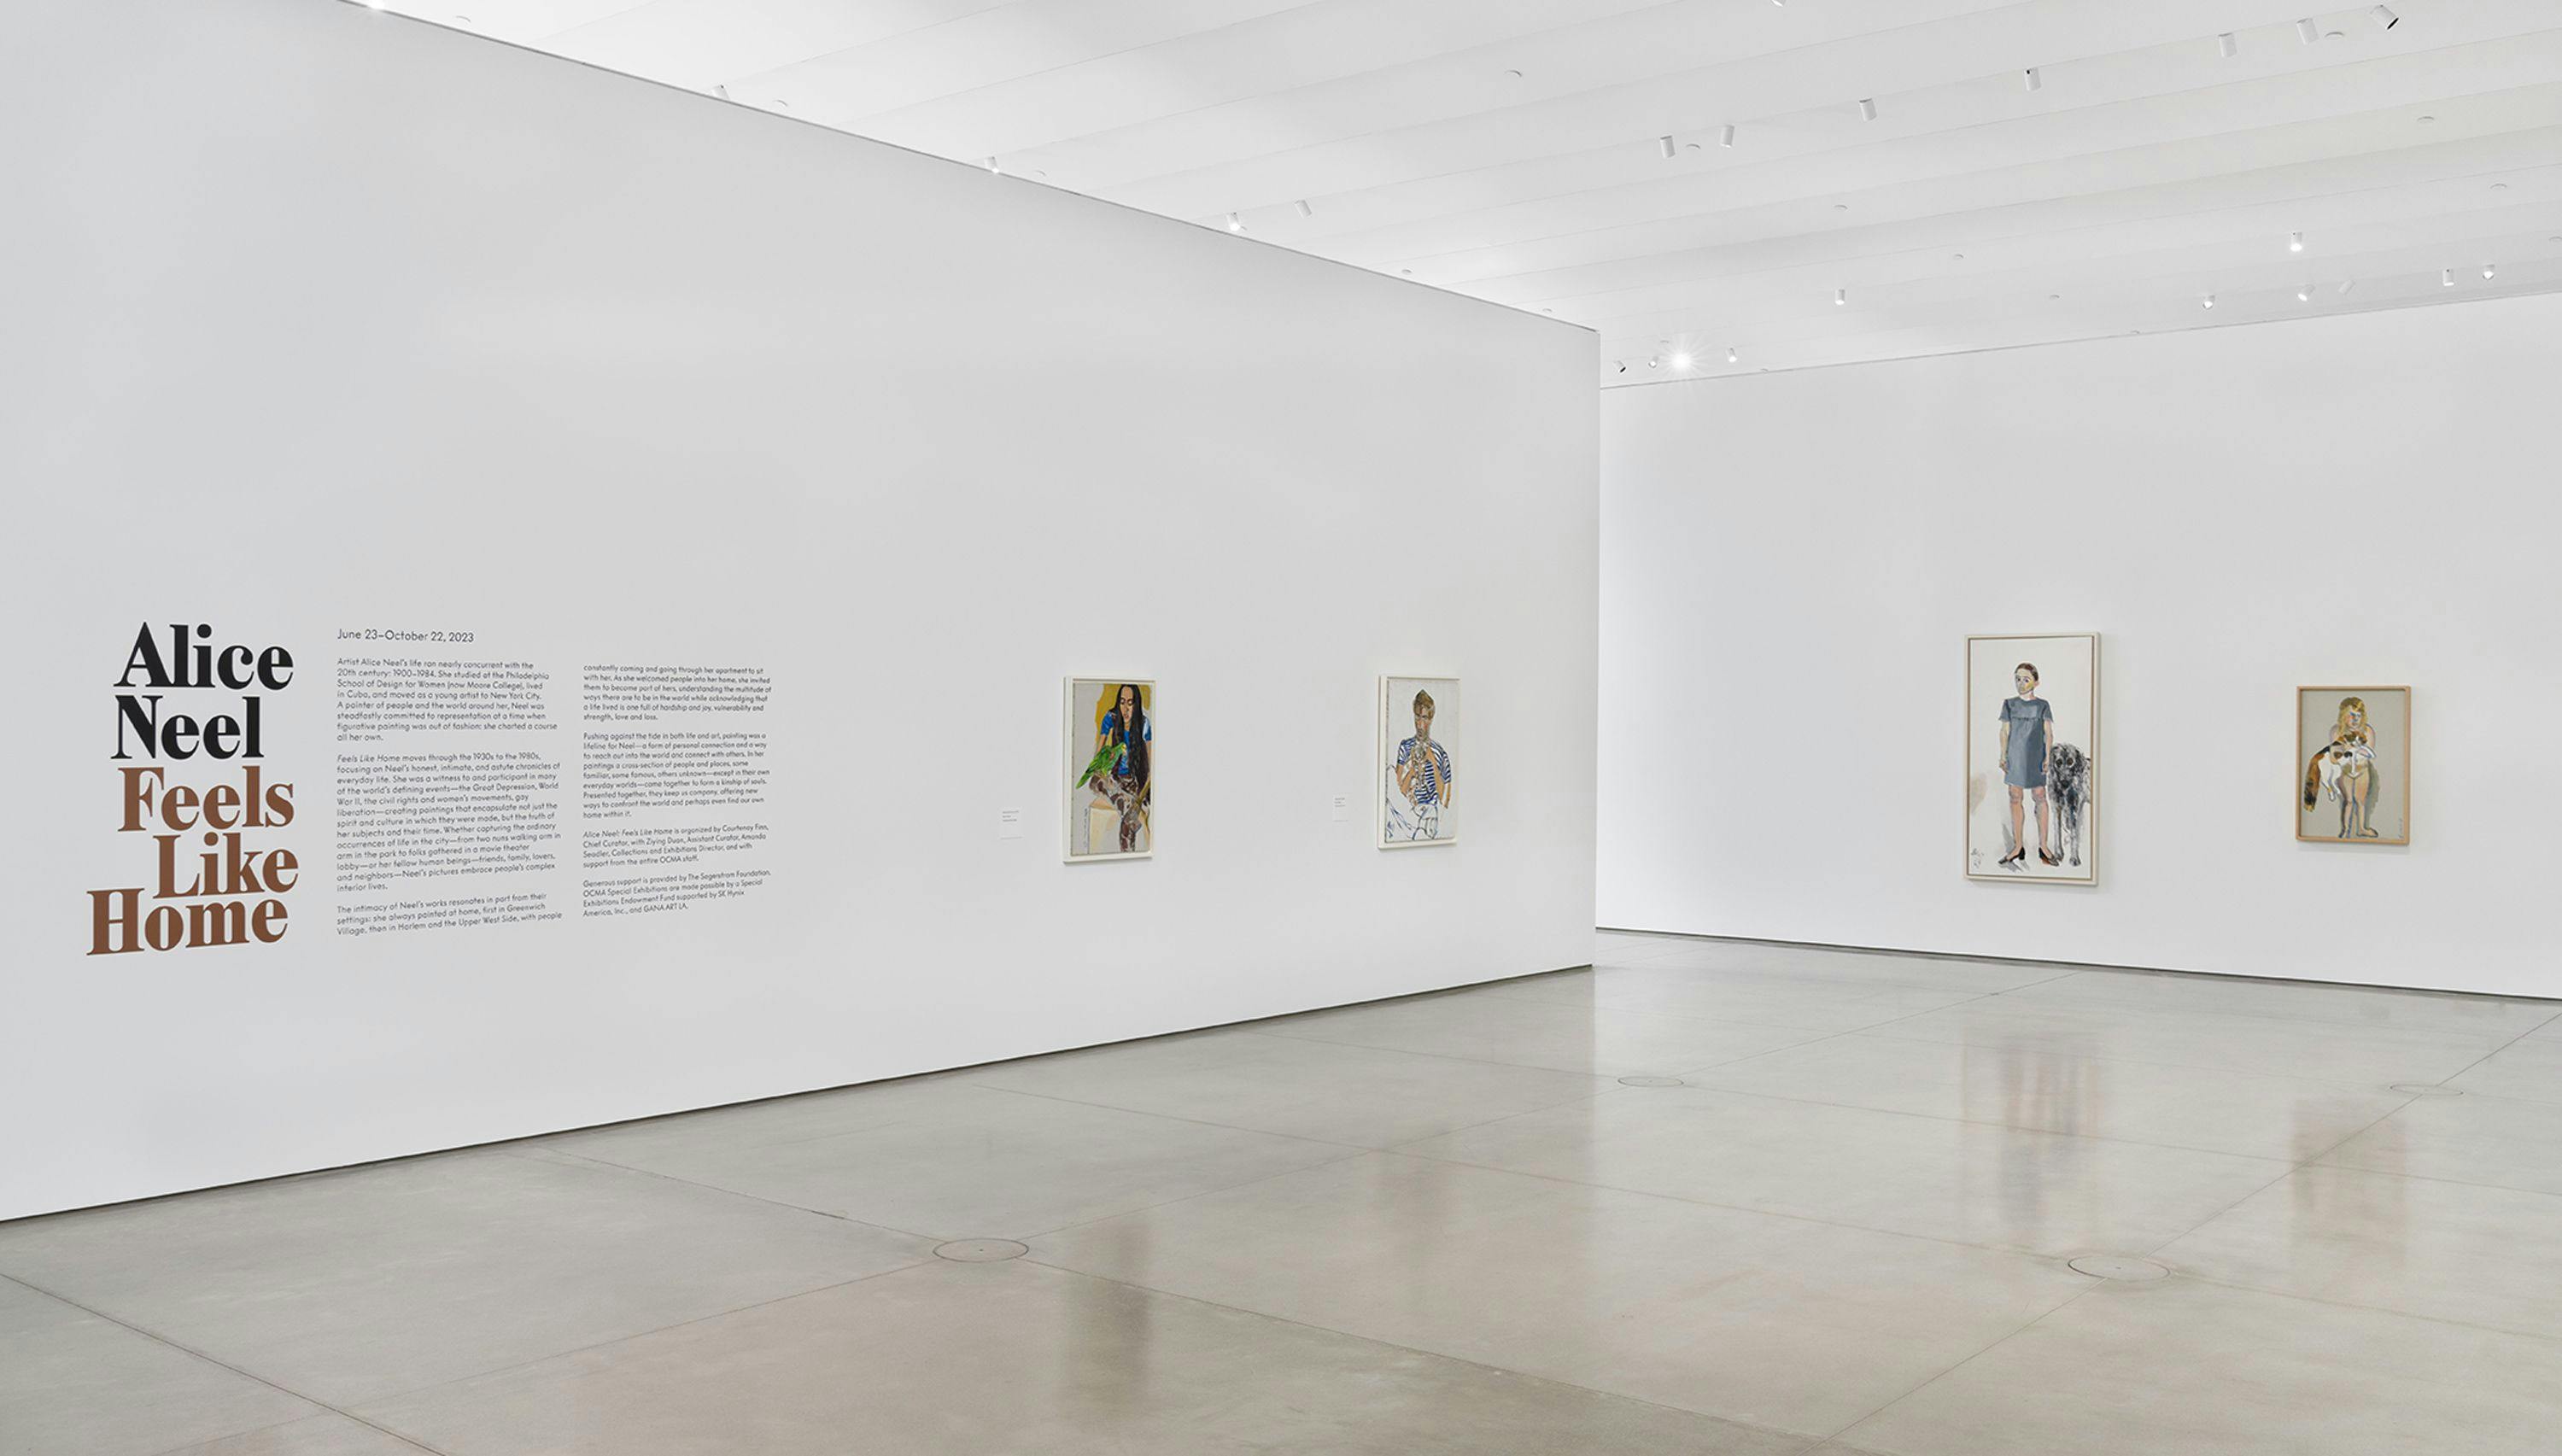 Installation view of Alice Neel: Feels Like Home, Orange County Museum of Art, 2023. Photo by Yubo Dong, ofstudio